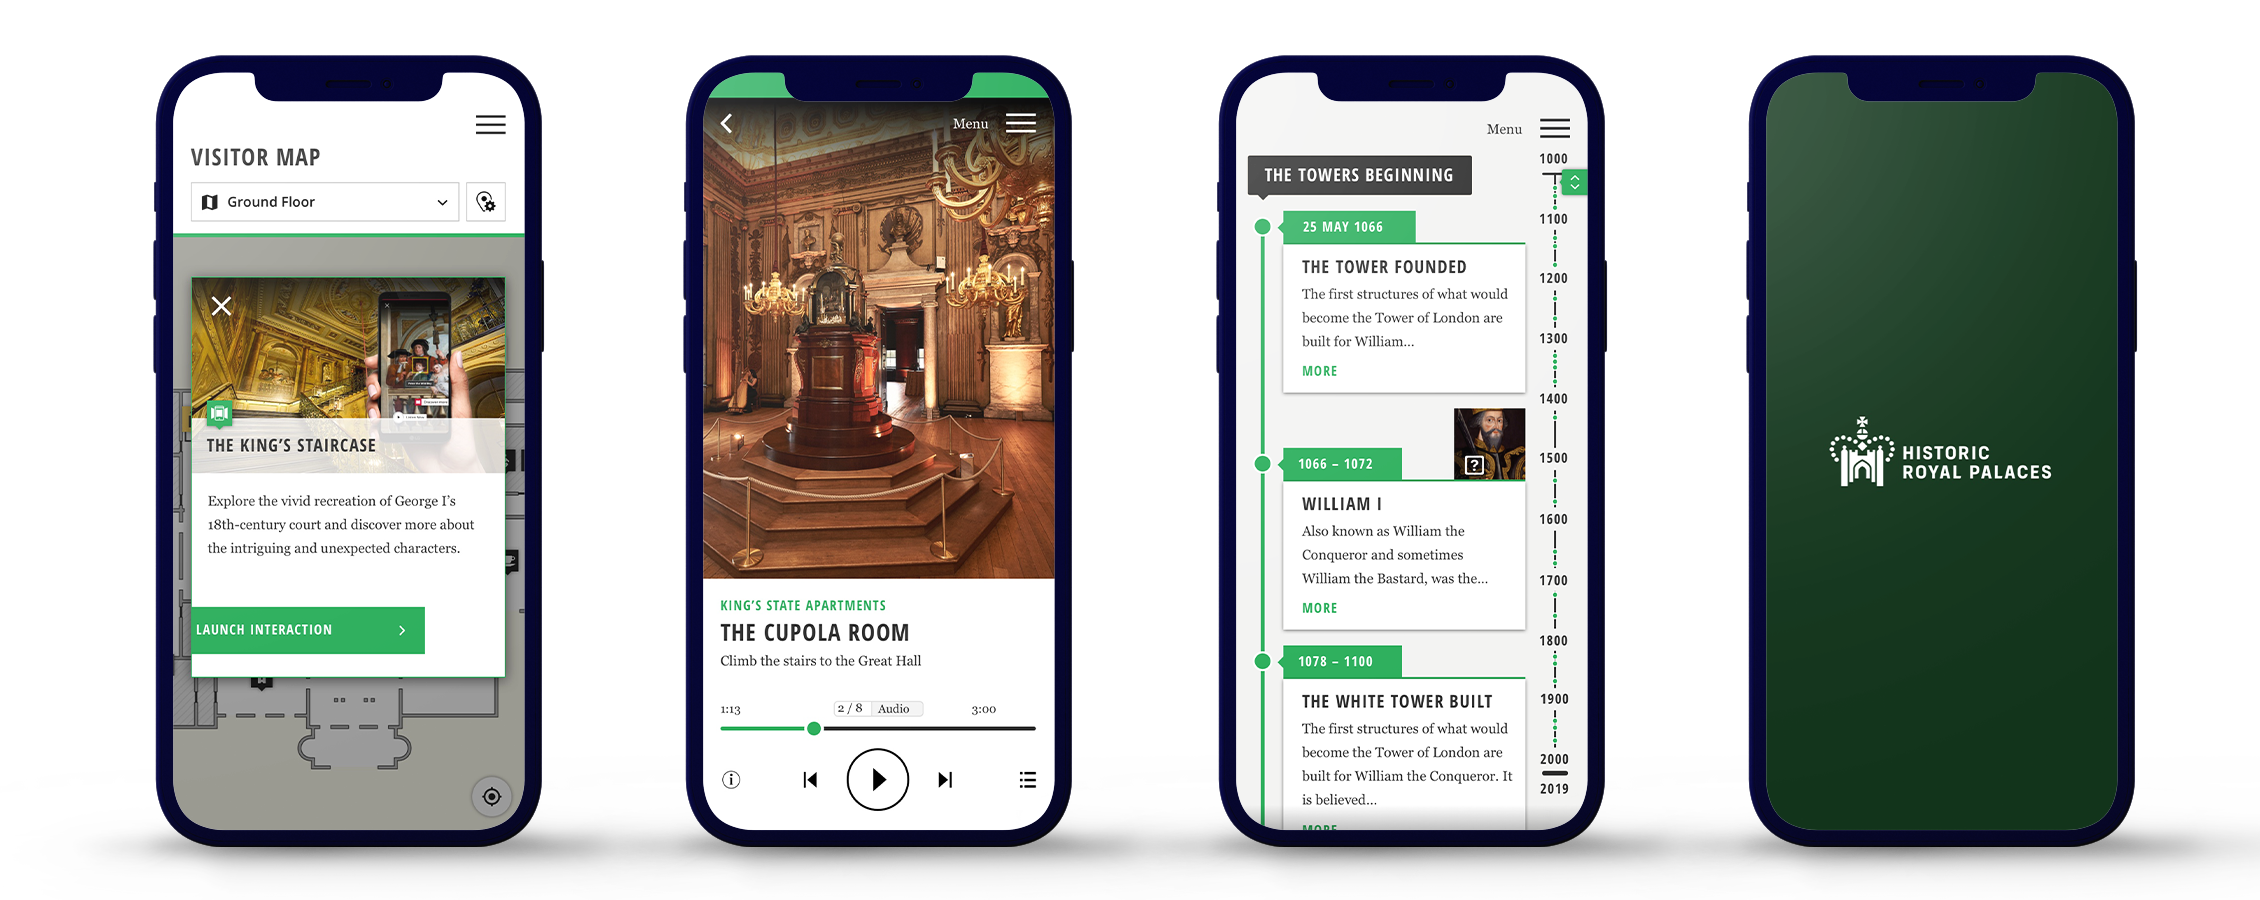 Historic Royal Palaces app on multiple phones side by side